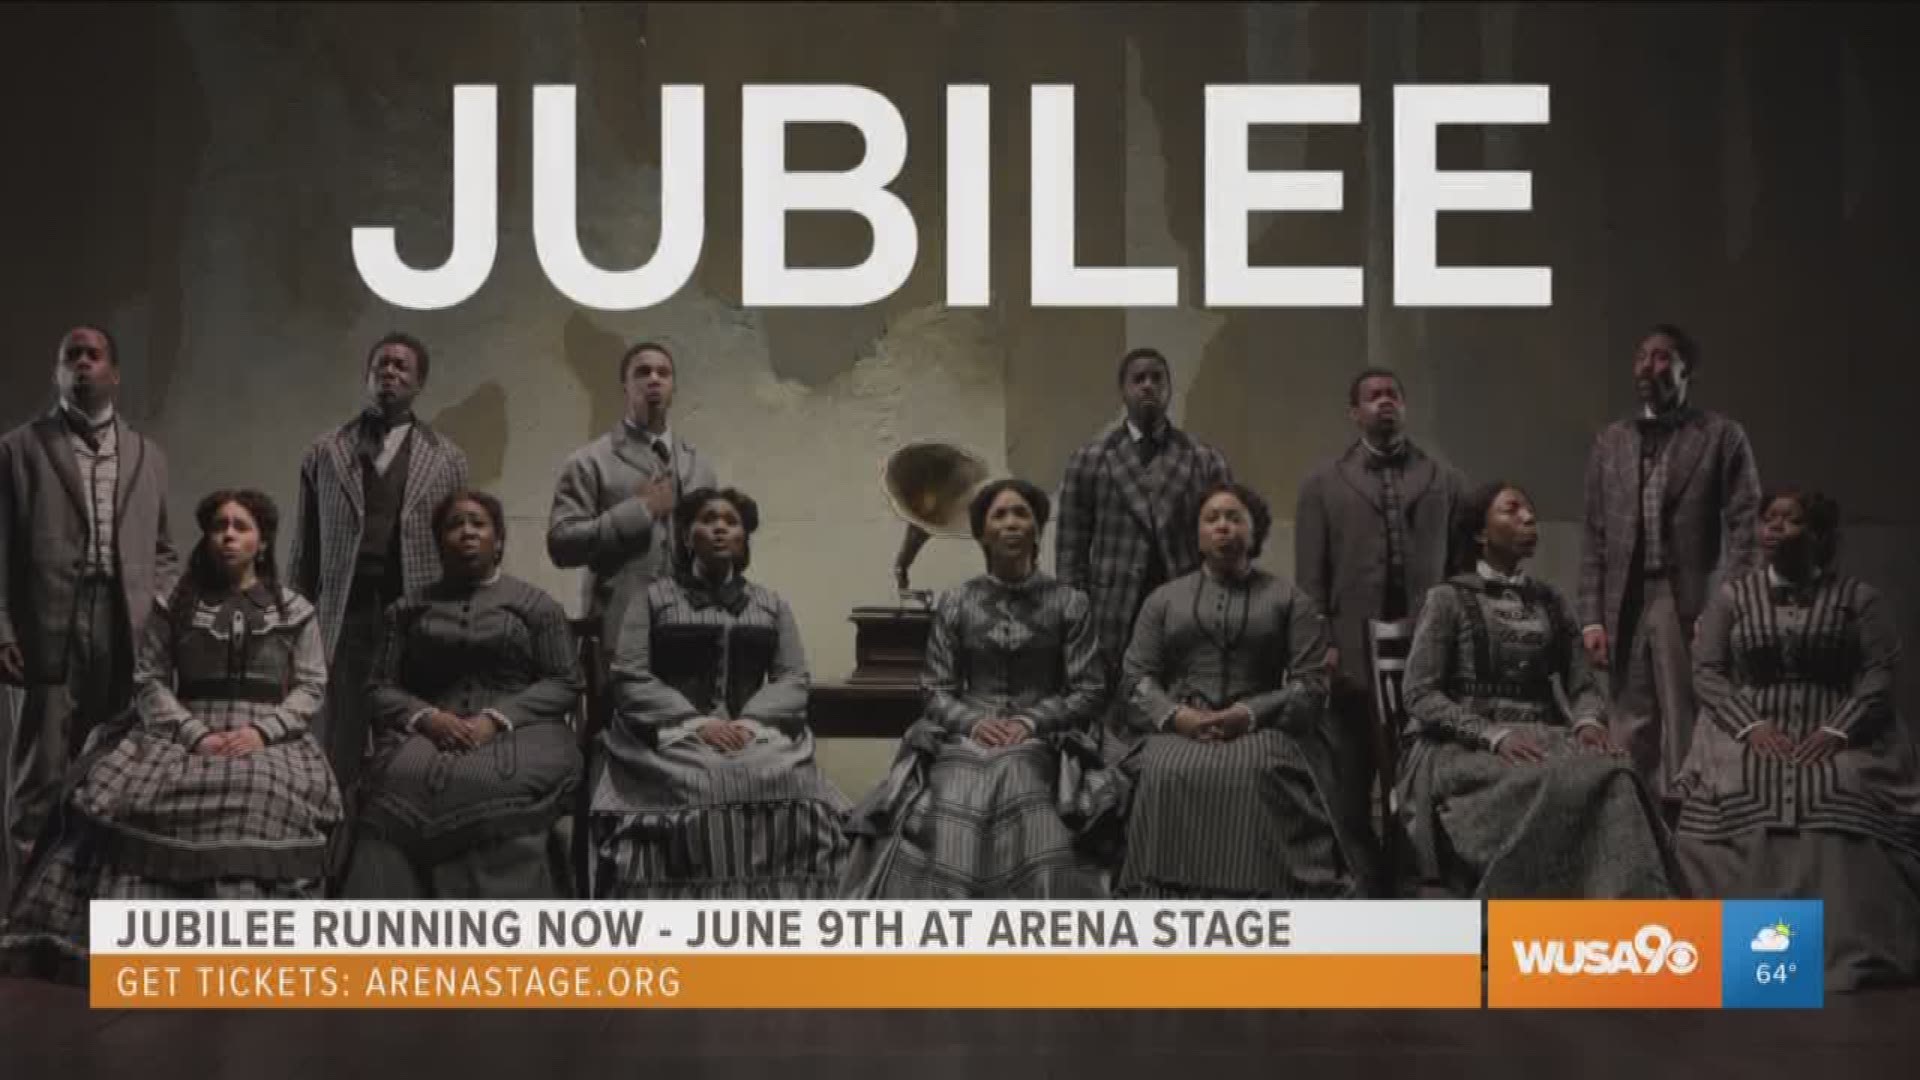 Jubilee is running at Arena Stage through June 9th and we get a special preview. Get tickets at www.ArenaStage.org